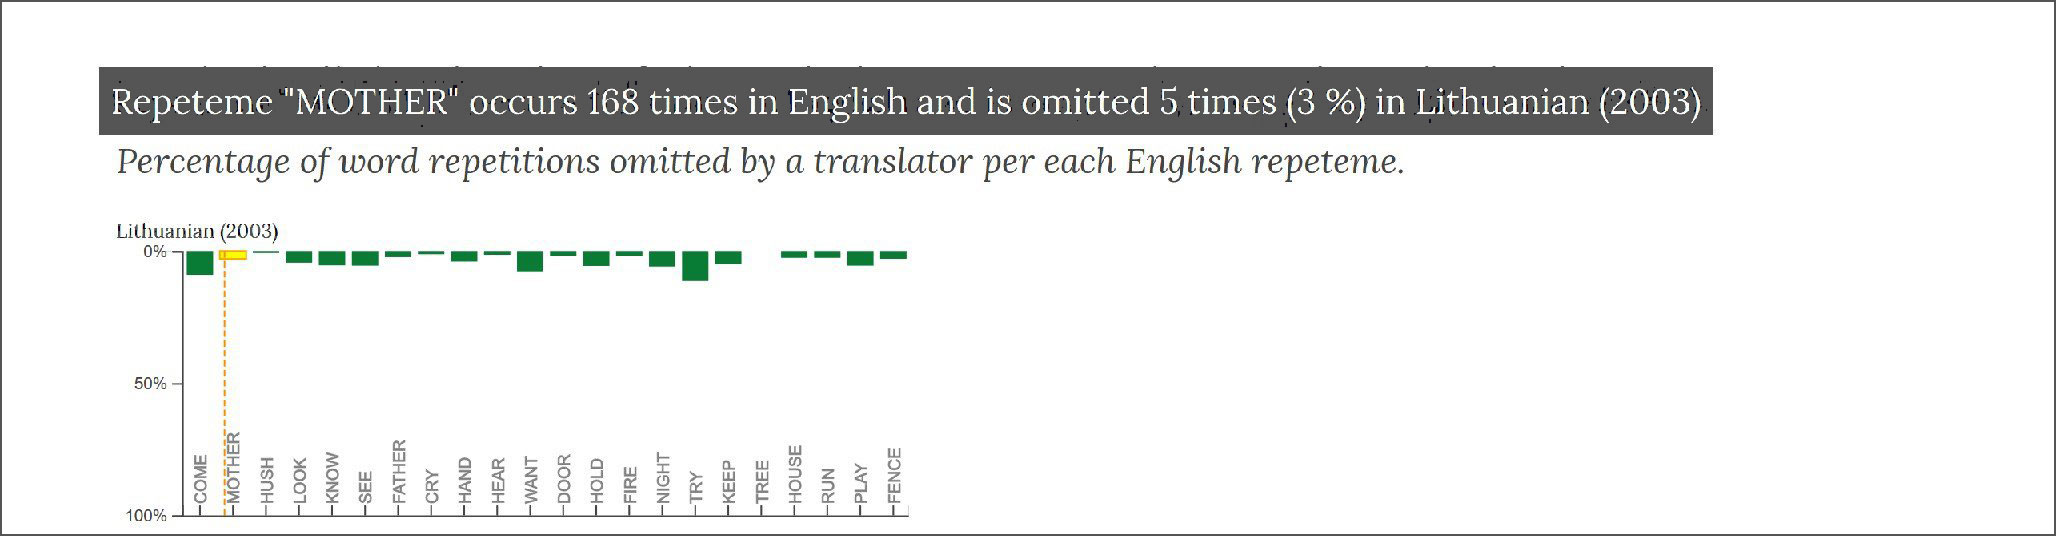 A bar graph presenting the percentage of word repetitions omitted by a translator per each English repeteme in Lithuanian translation (2003)